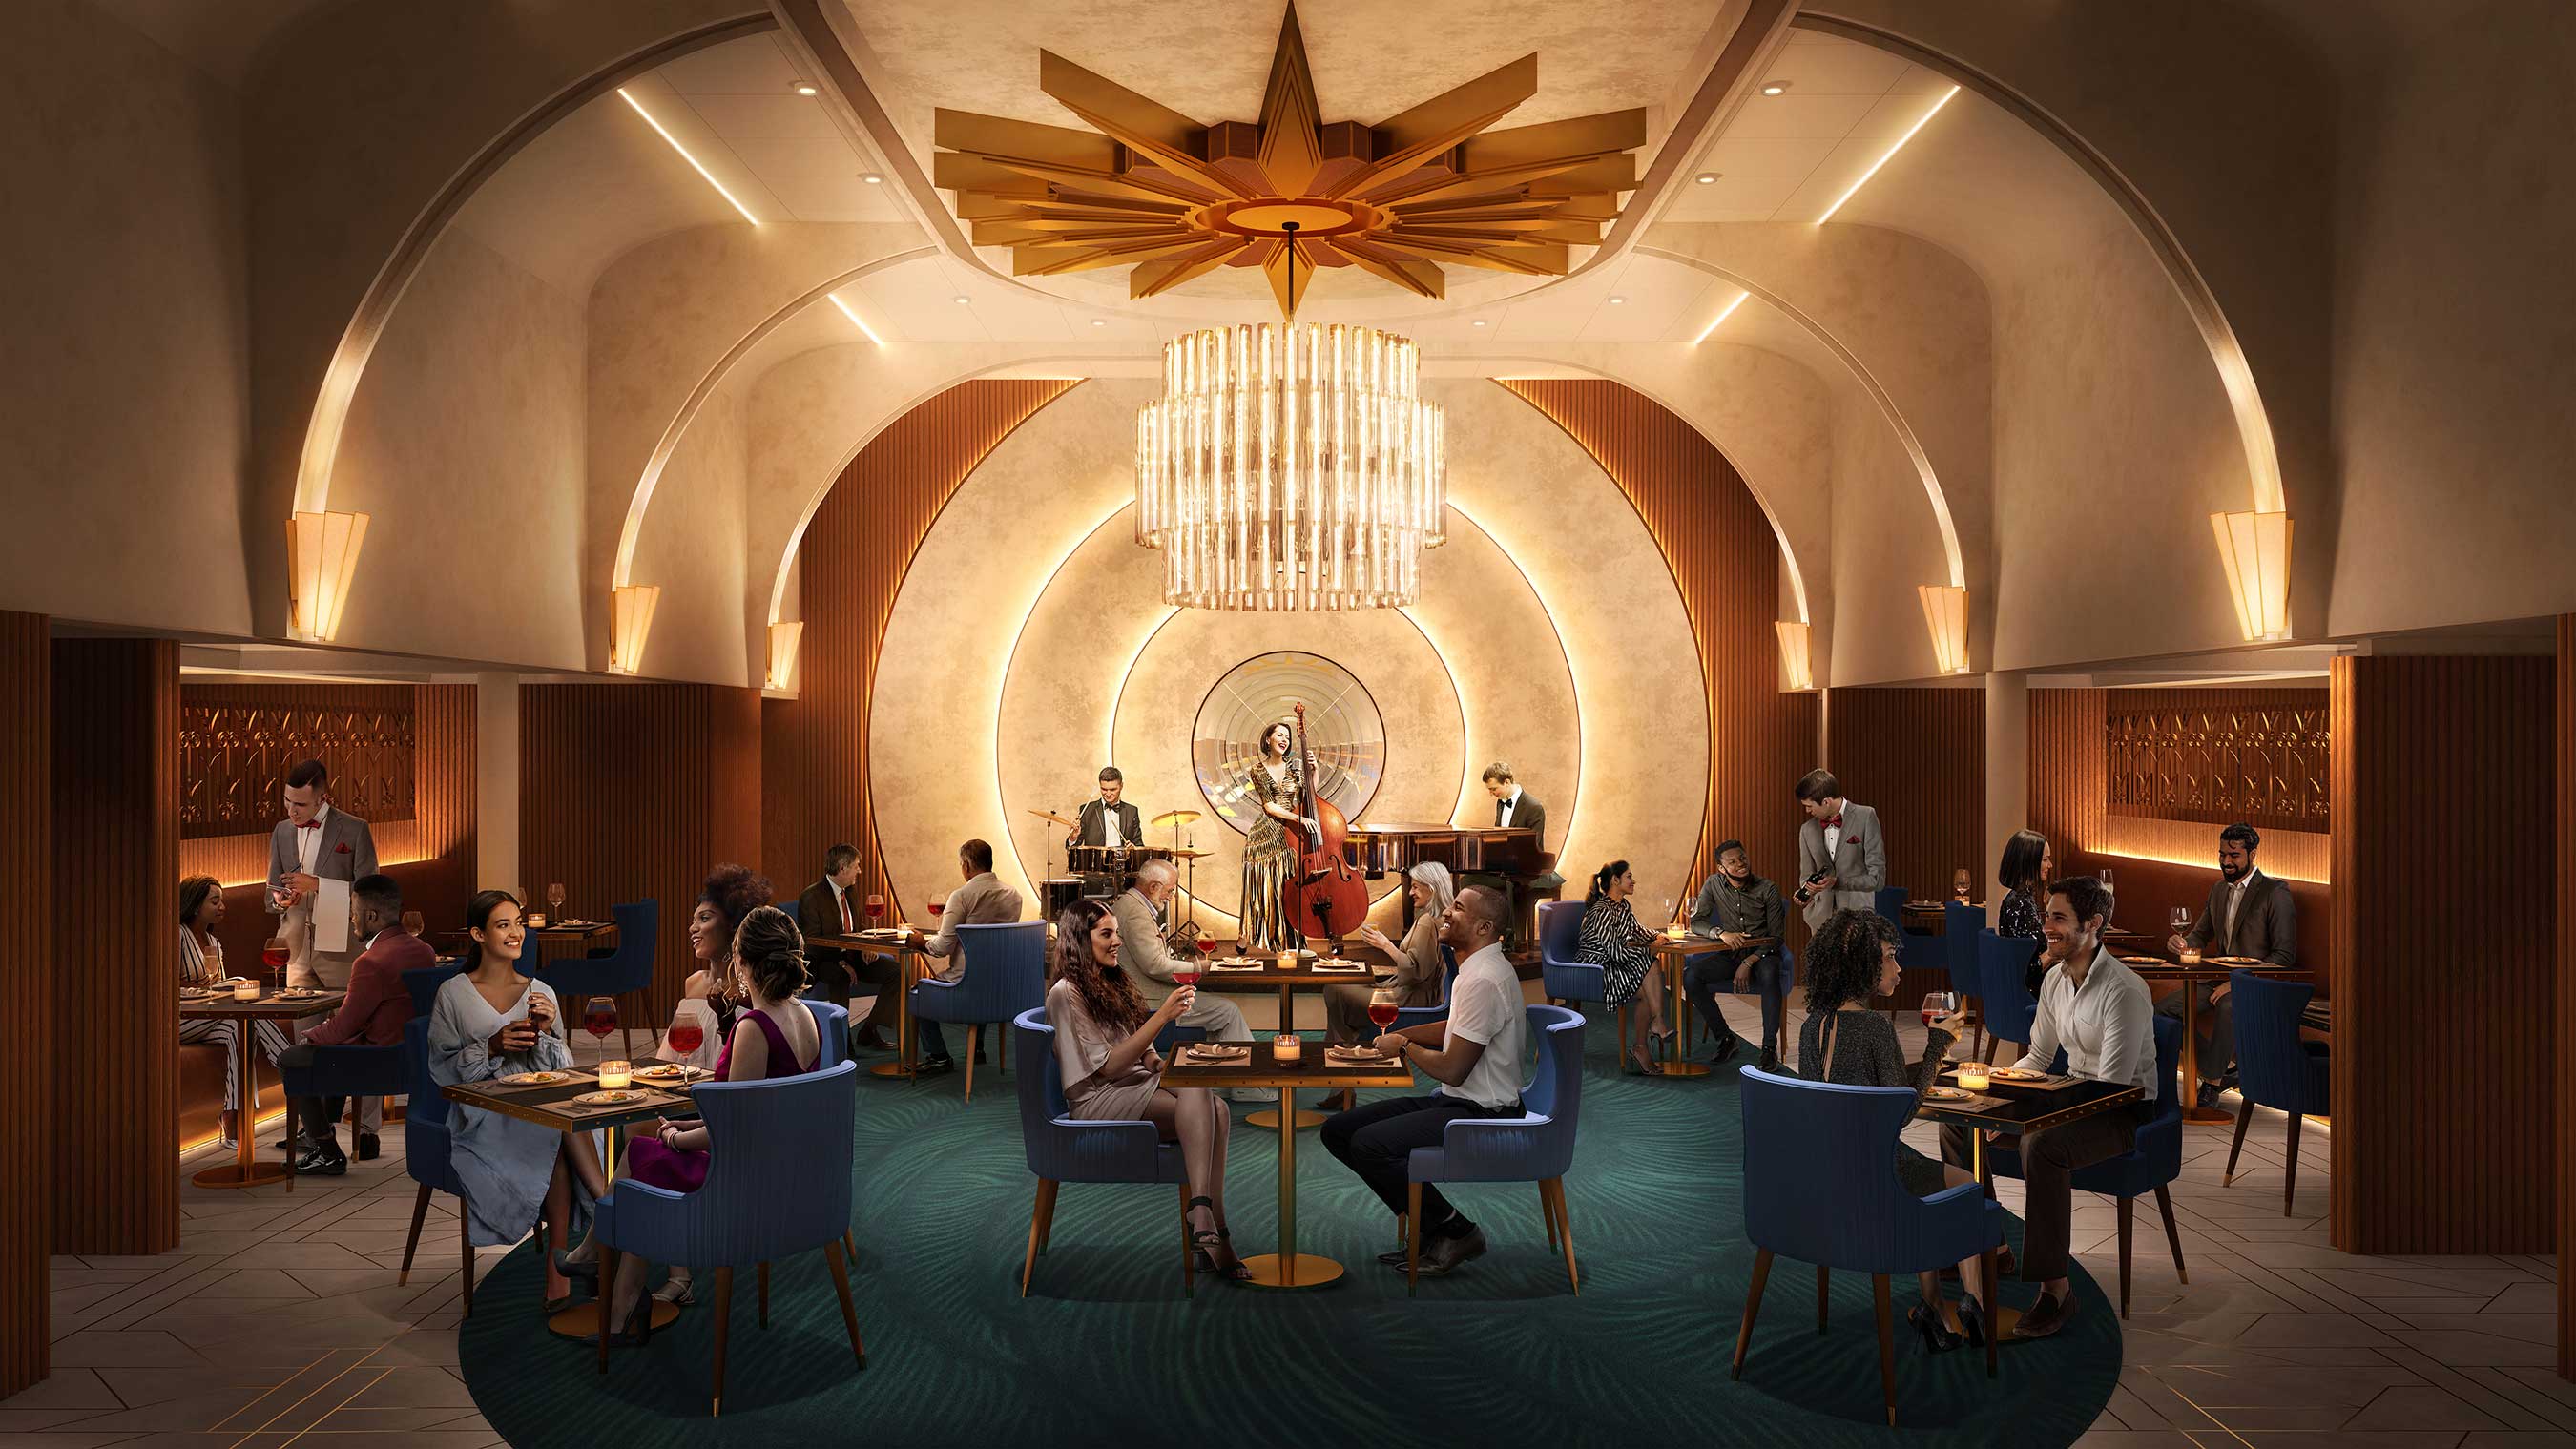 Icon of the Seas’ new Empire Supper Club in Central Park is an eight-course experience, serving up premium American cuisine and tunes from a swanky three-piece band.